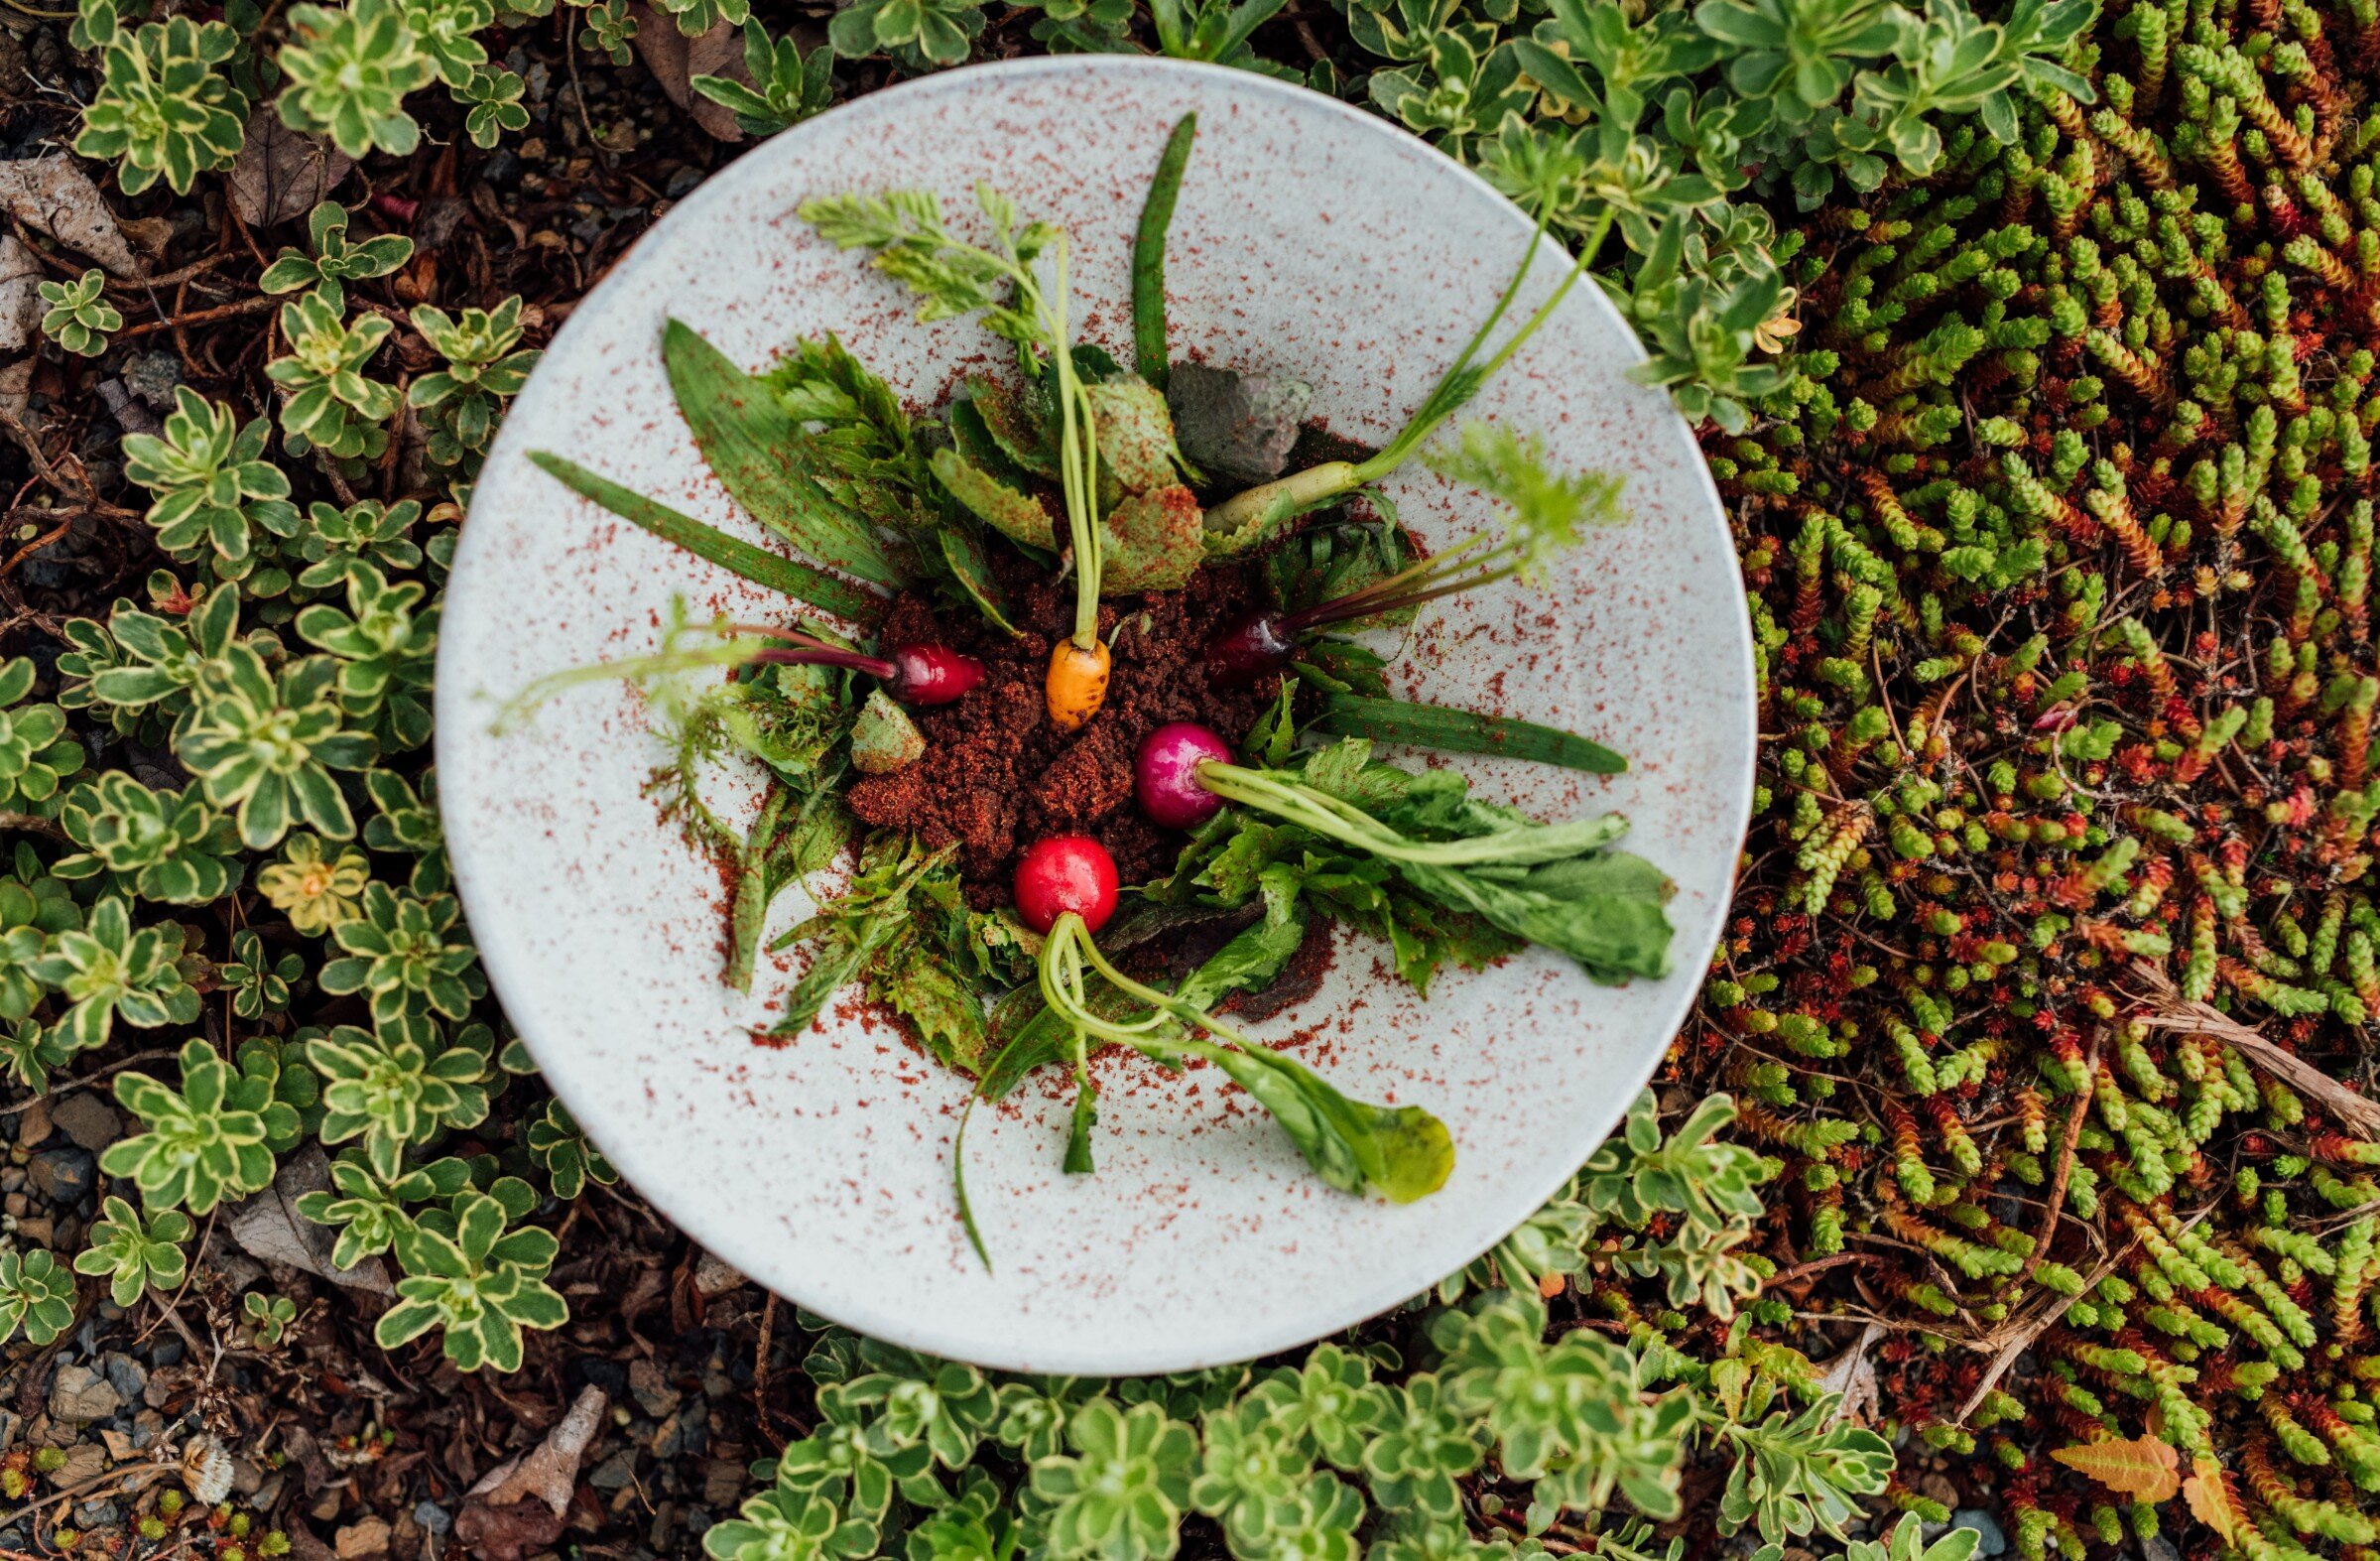 A plate of salad in the wild